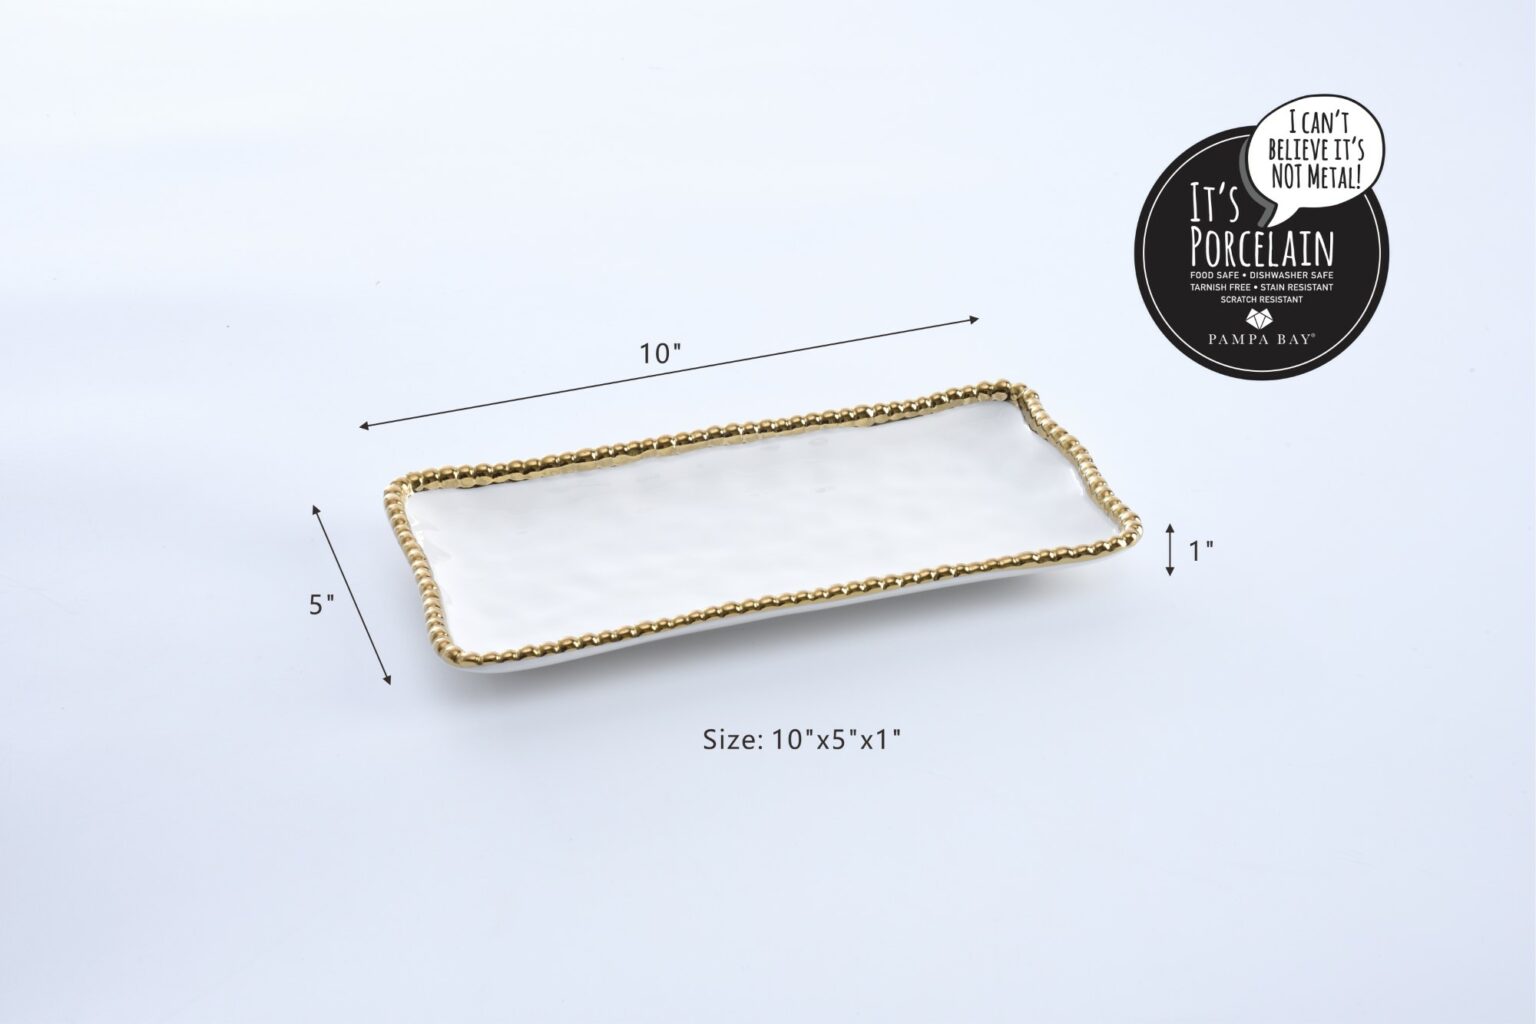 Golden Salerno Guest Towel Tray